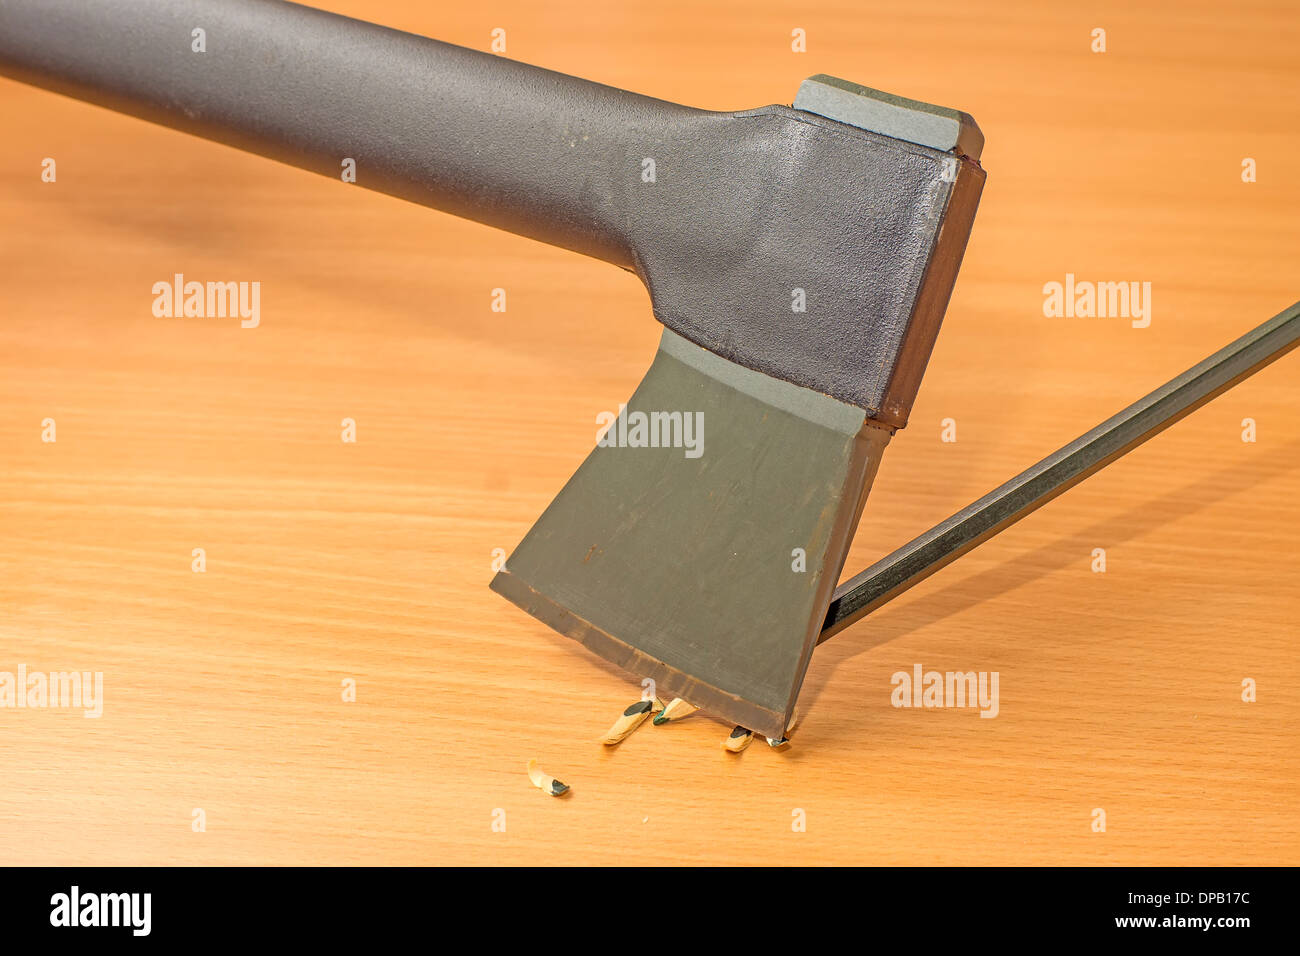 Sharpening a pencil with an axe Stock Photo